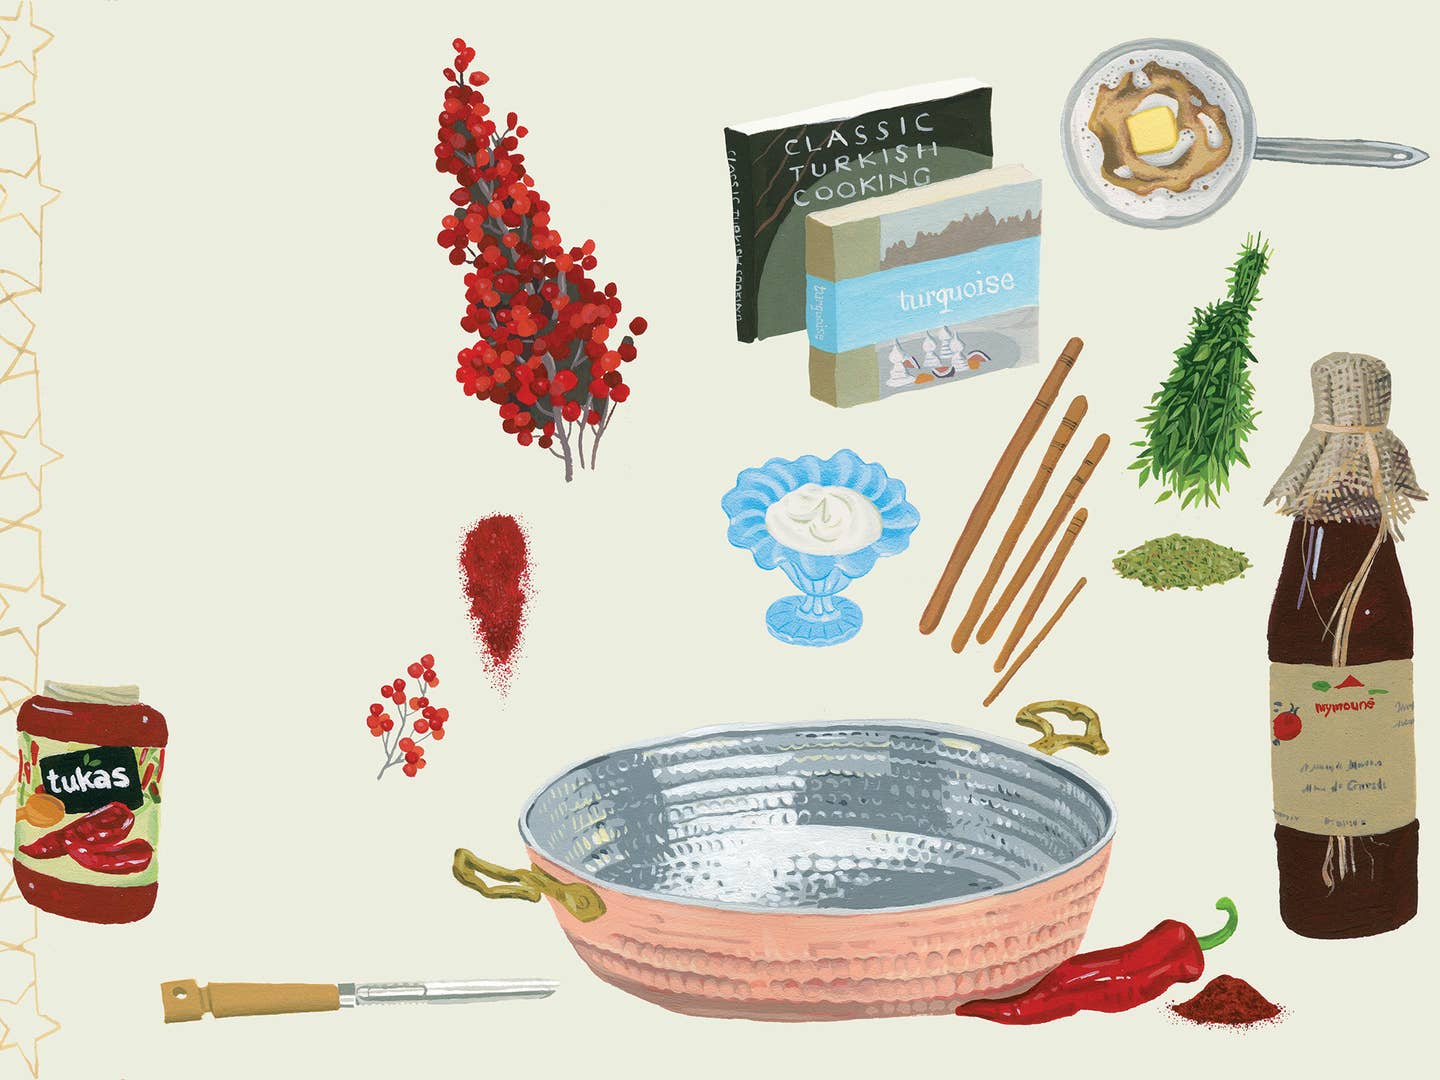 13 Essential Tools and Ingredients to Cook Better Turkish Food